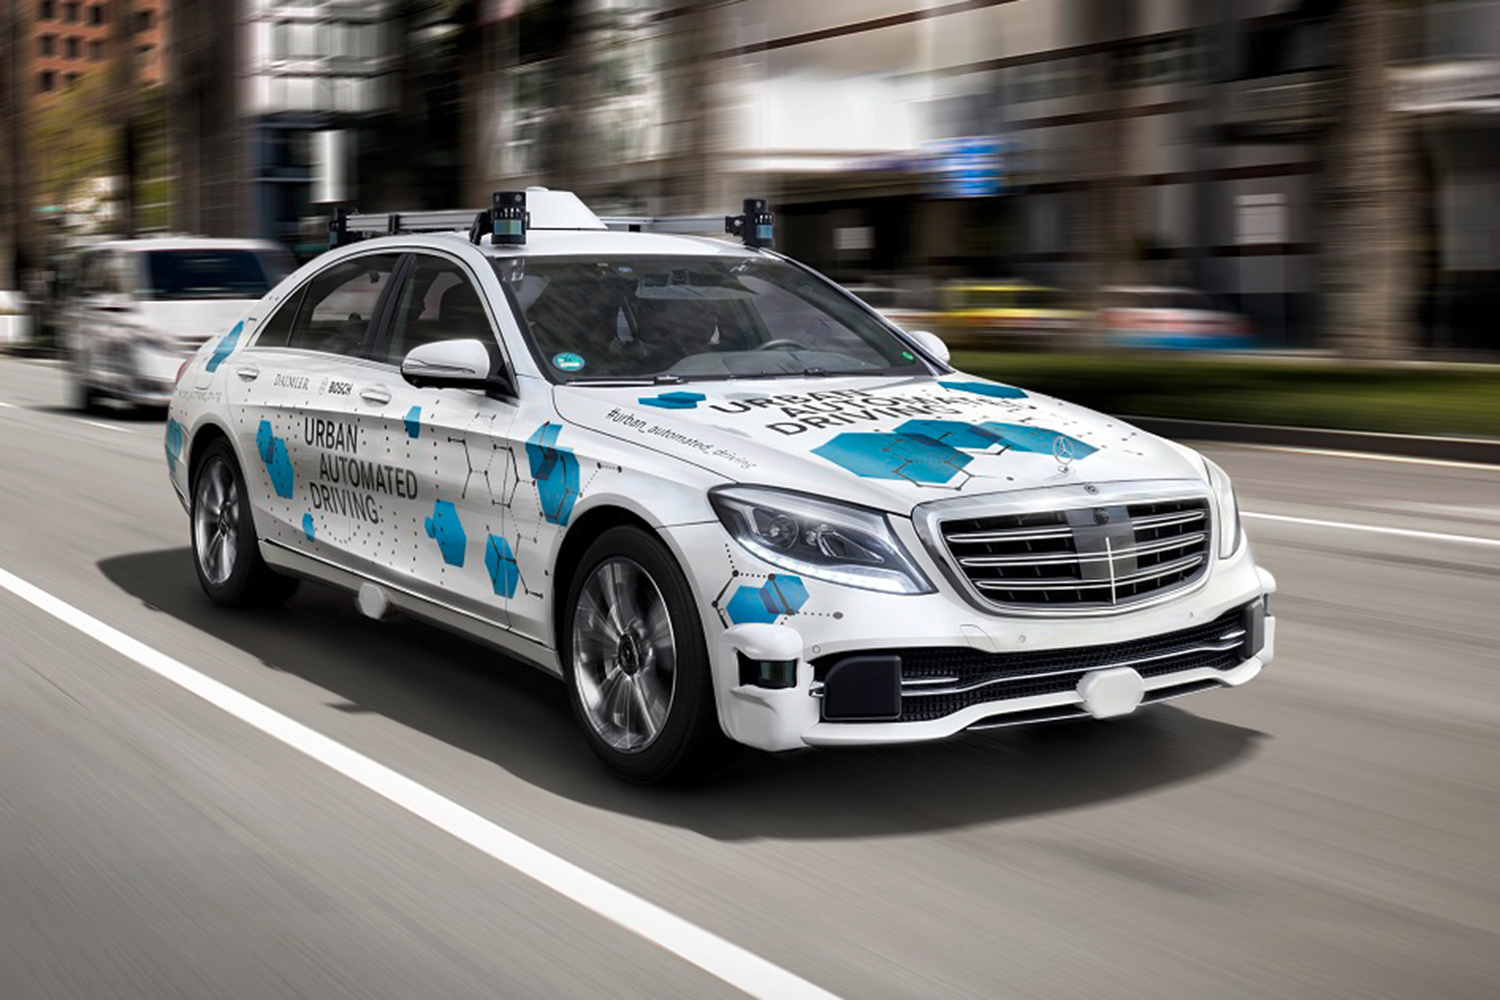 Mercedes wants you to make new friends in this driverless Smart car of the  future